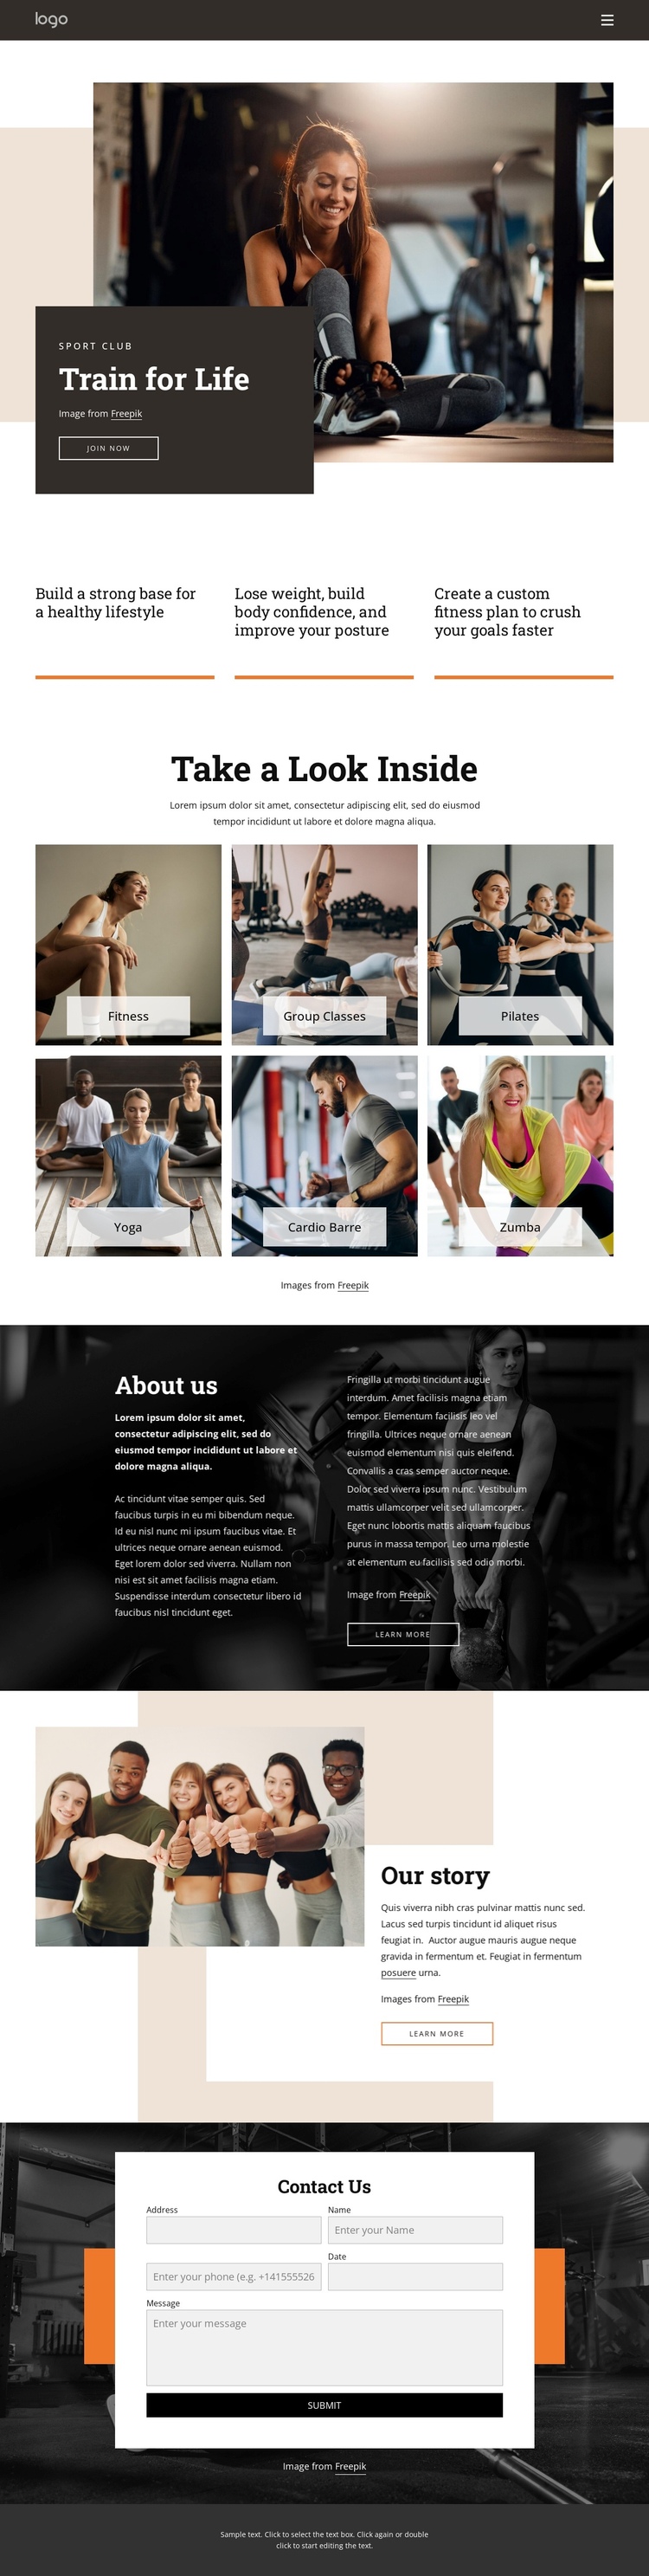 Get moving with our range of classes Website Builder Software